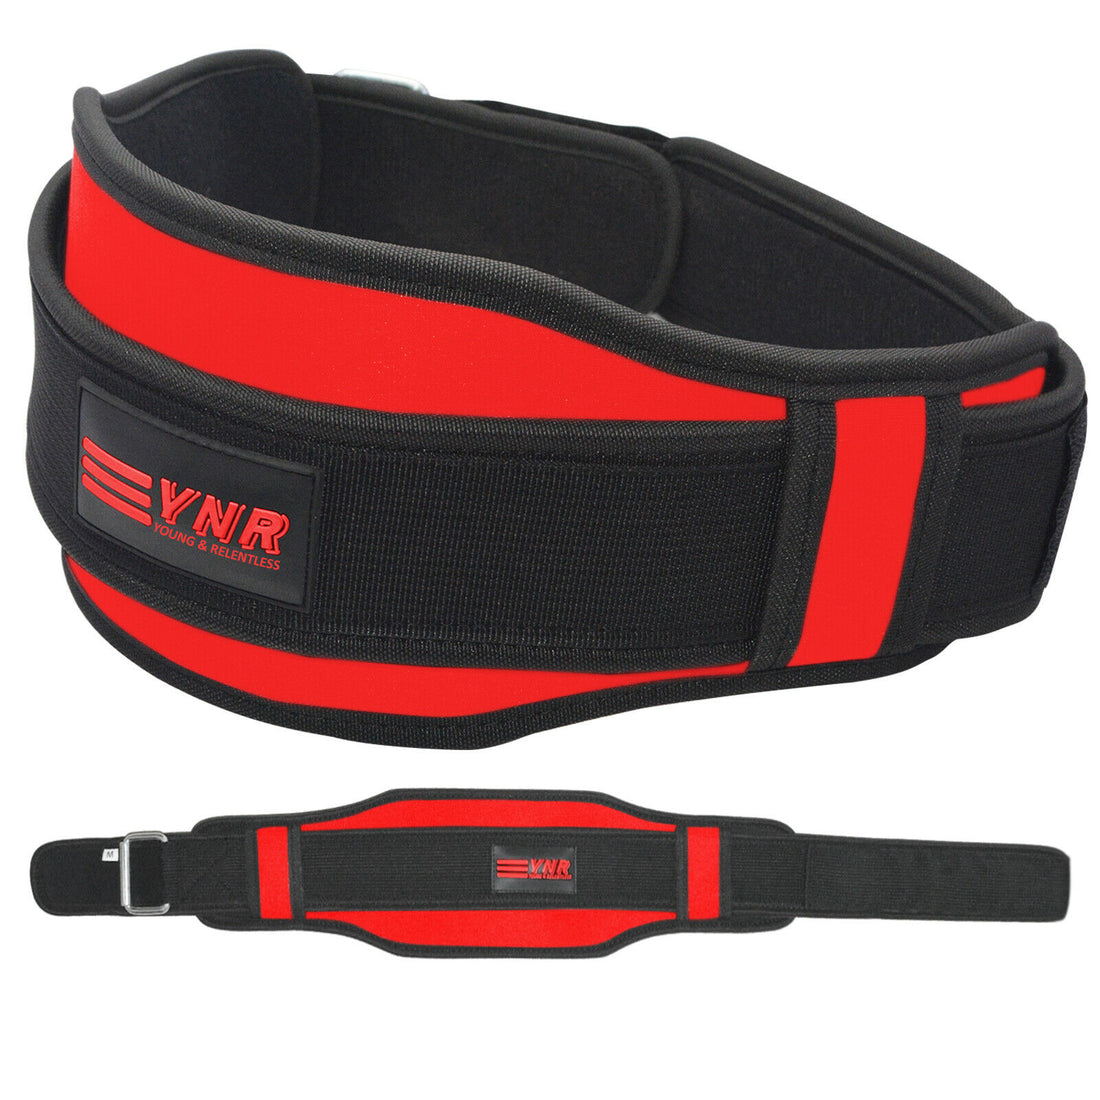 Weight Lifting Belt Gym Training Neoprene Fitness Workout Double Support